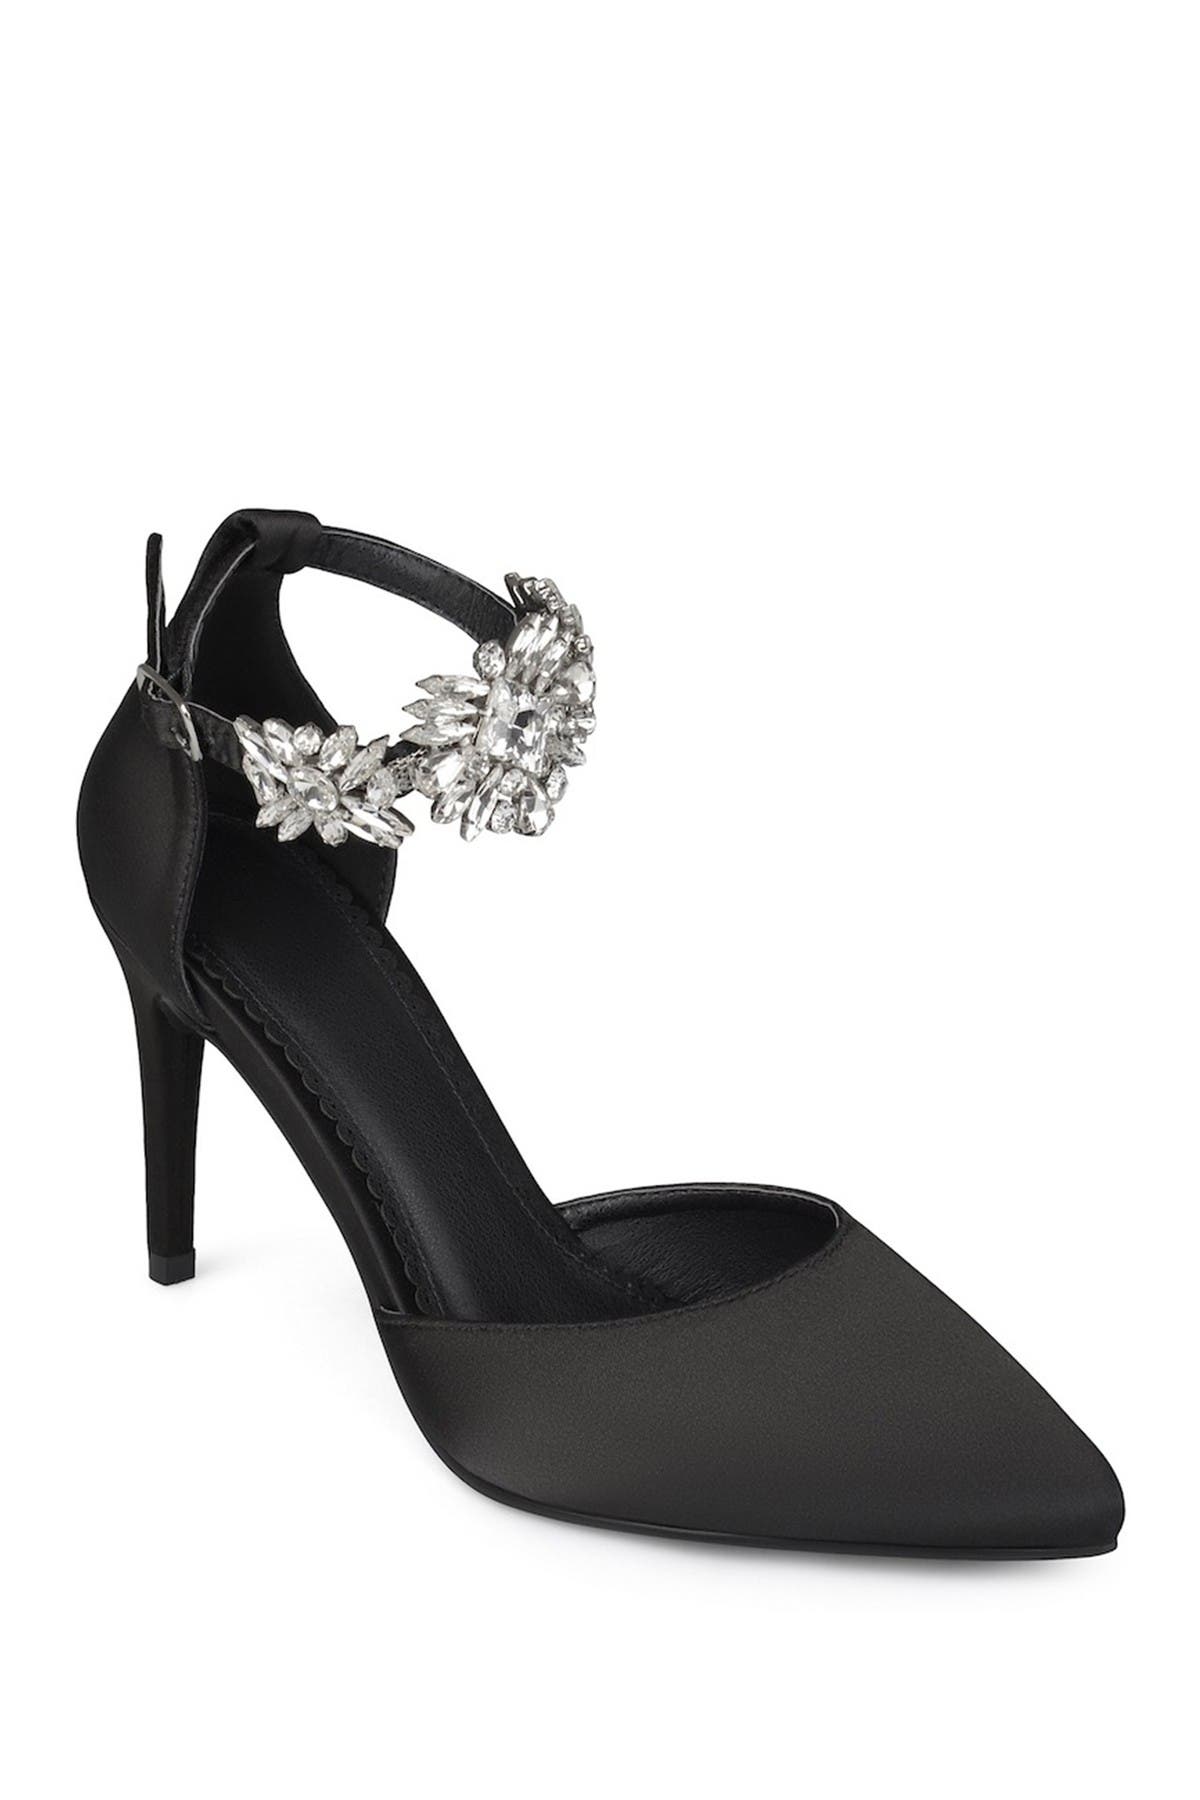 journee collection pumps